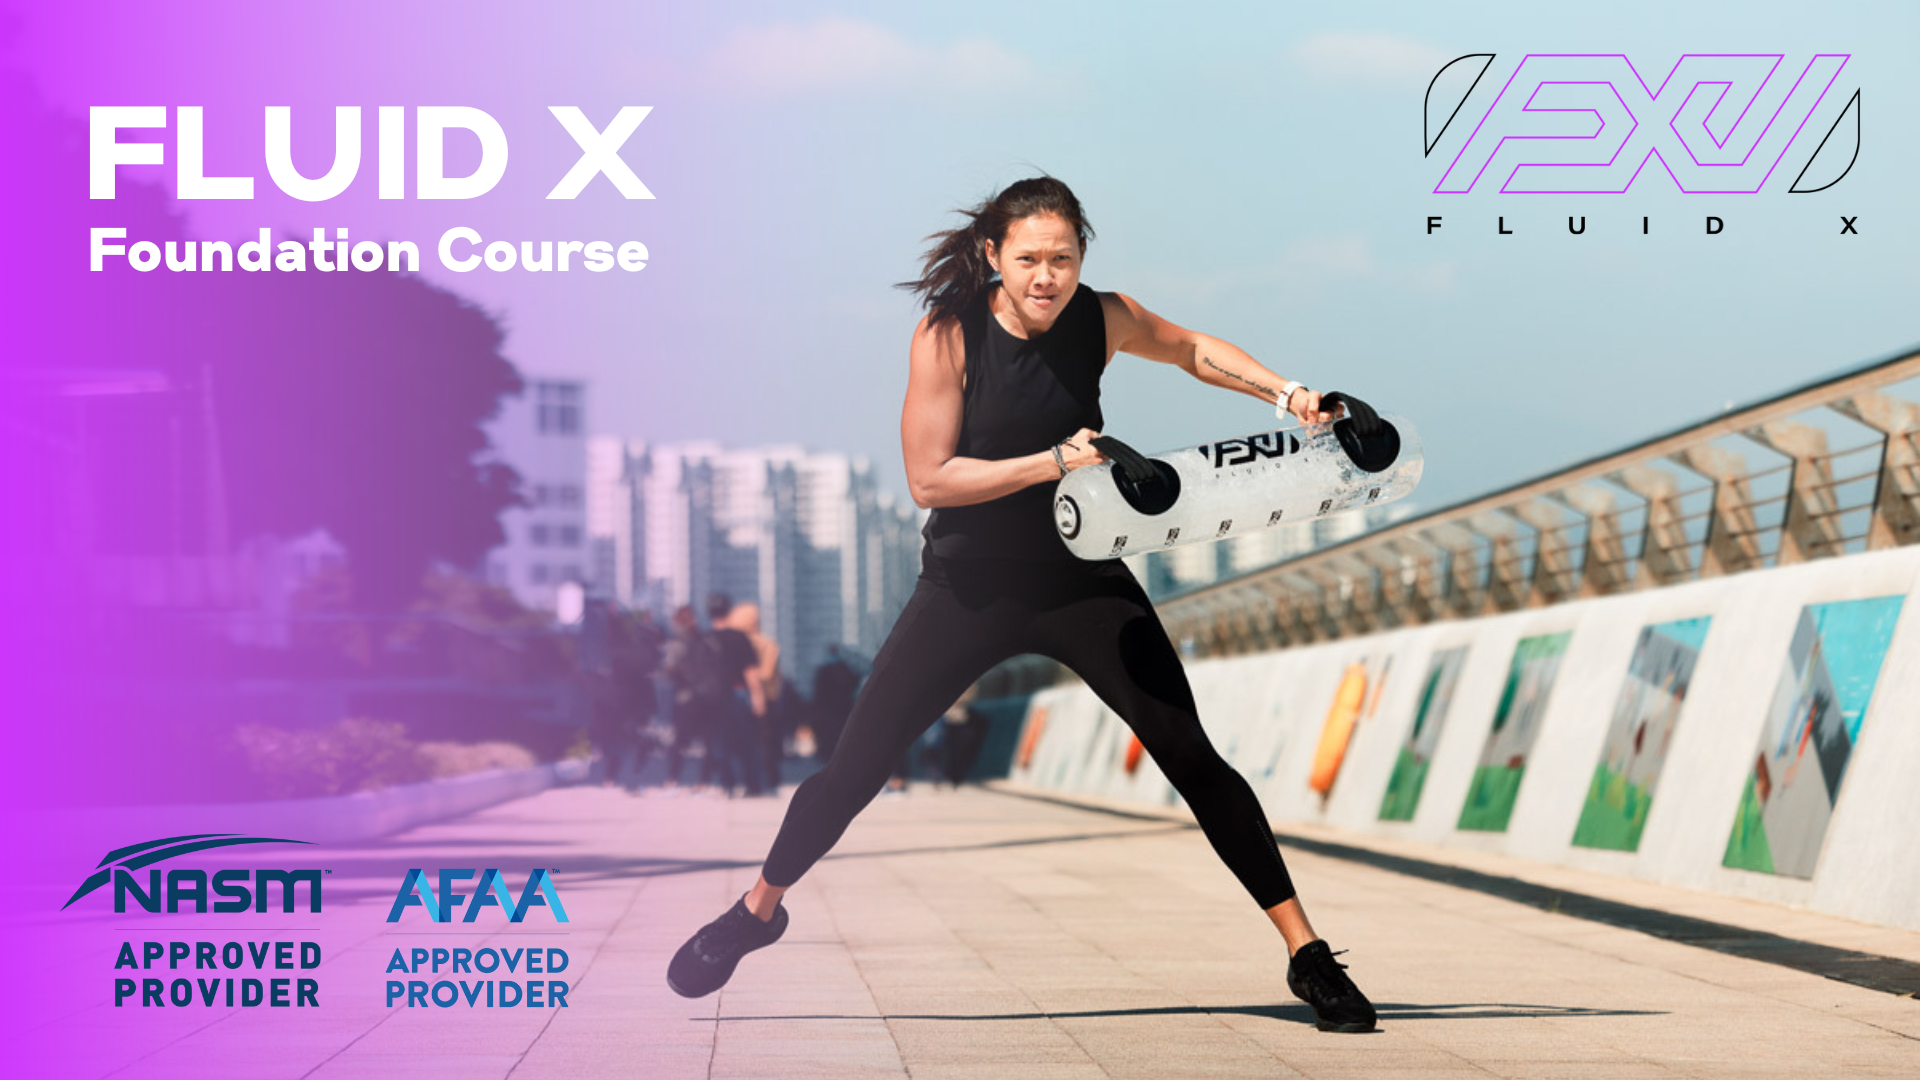 Fluid X Foundation Course approved by NASM/AFAA (HONG KONG)